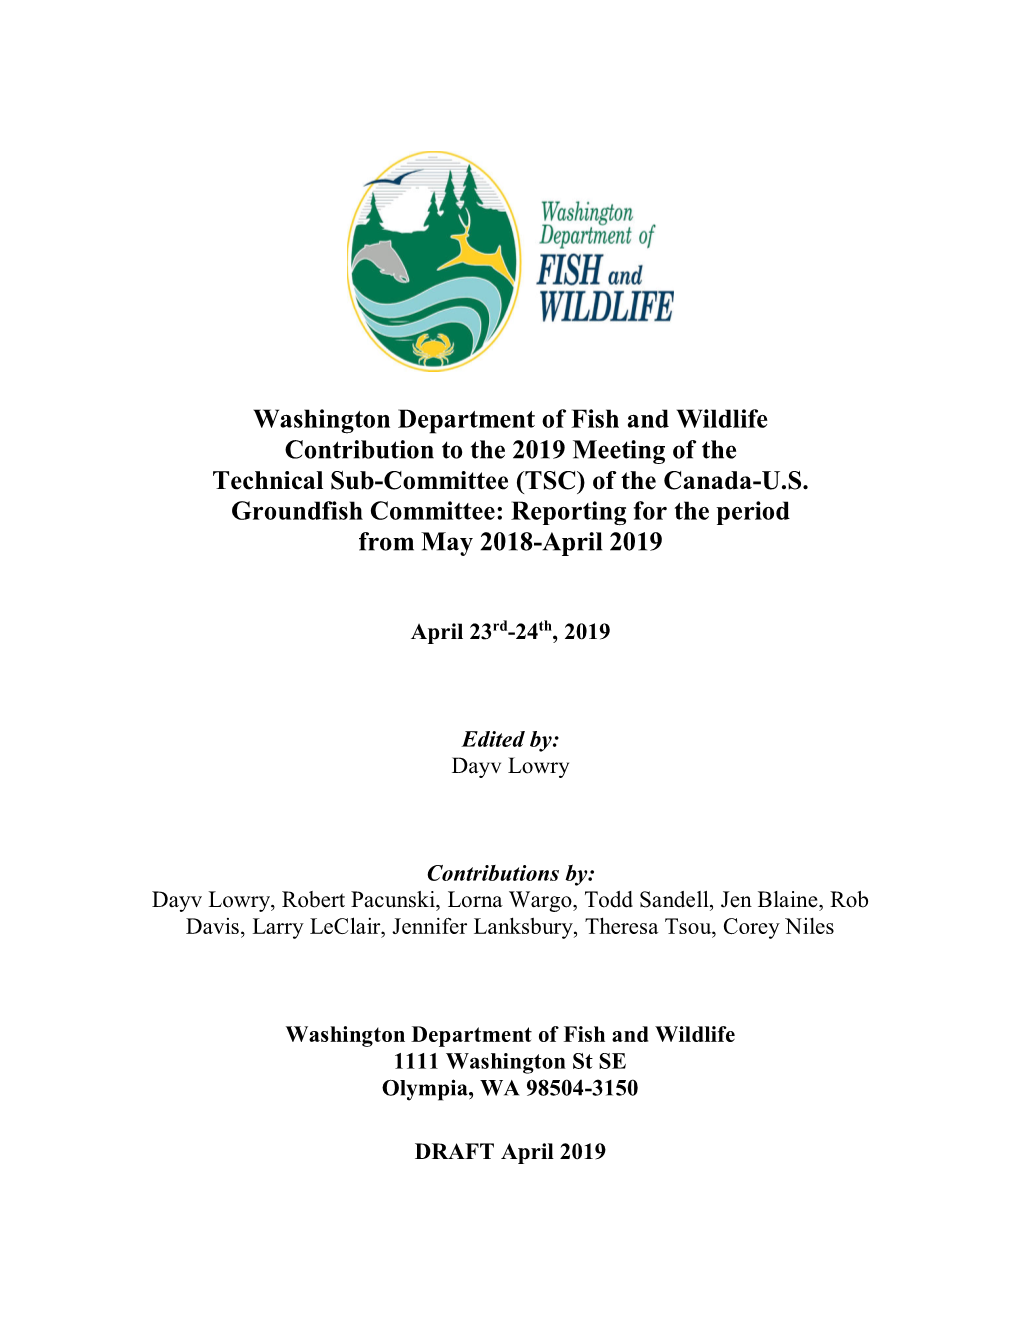 Washington Department of Fish and Wildlife Contribution to the 2019 Meeting of the Technical Sub-Committee (TSC) of the Canada-U.S